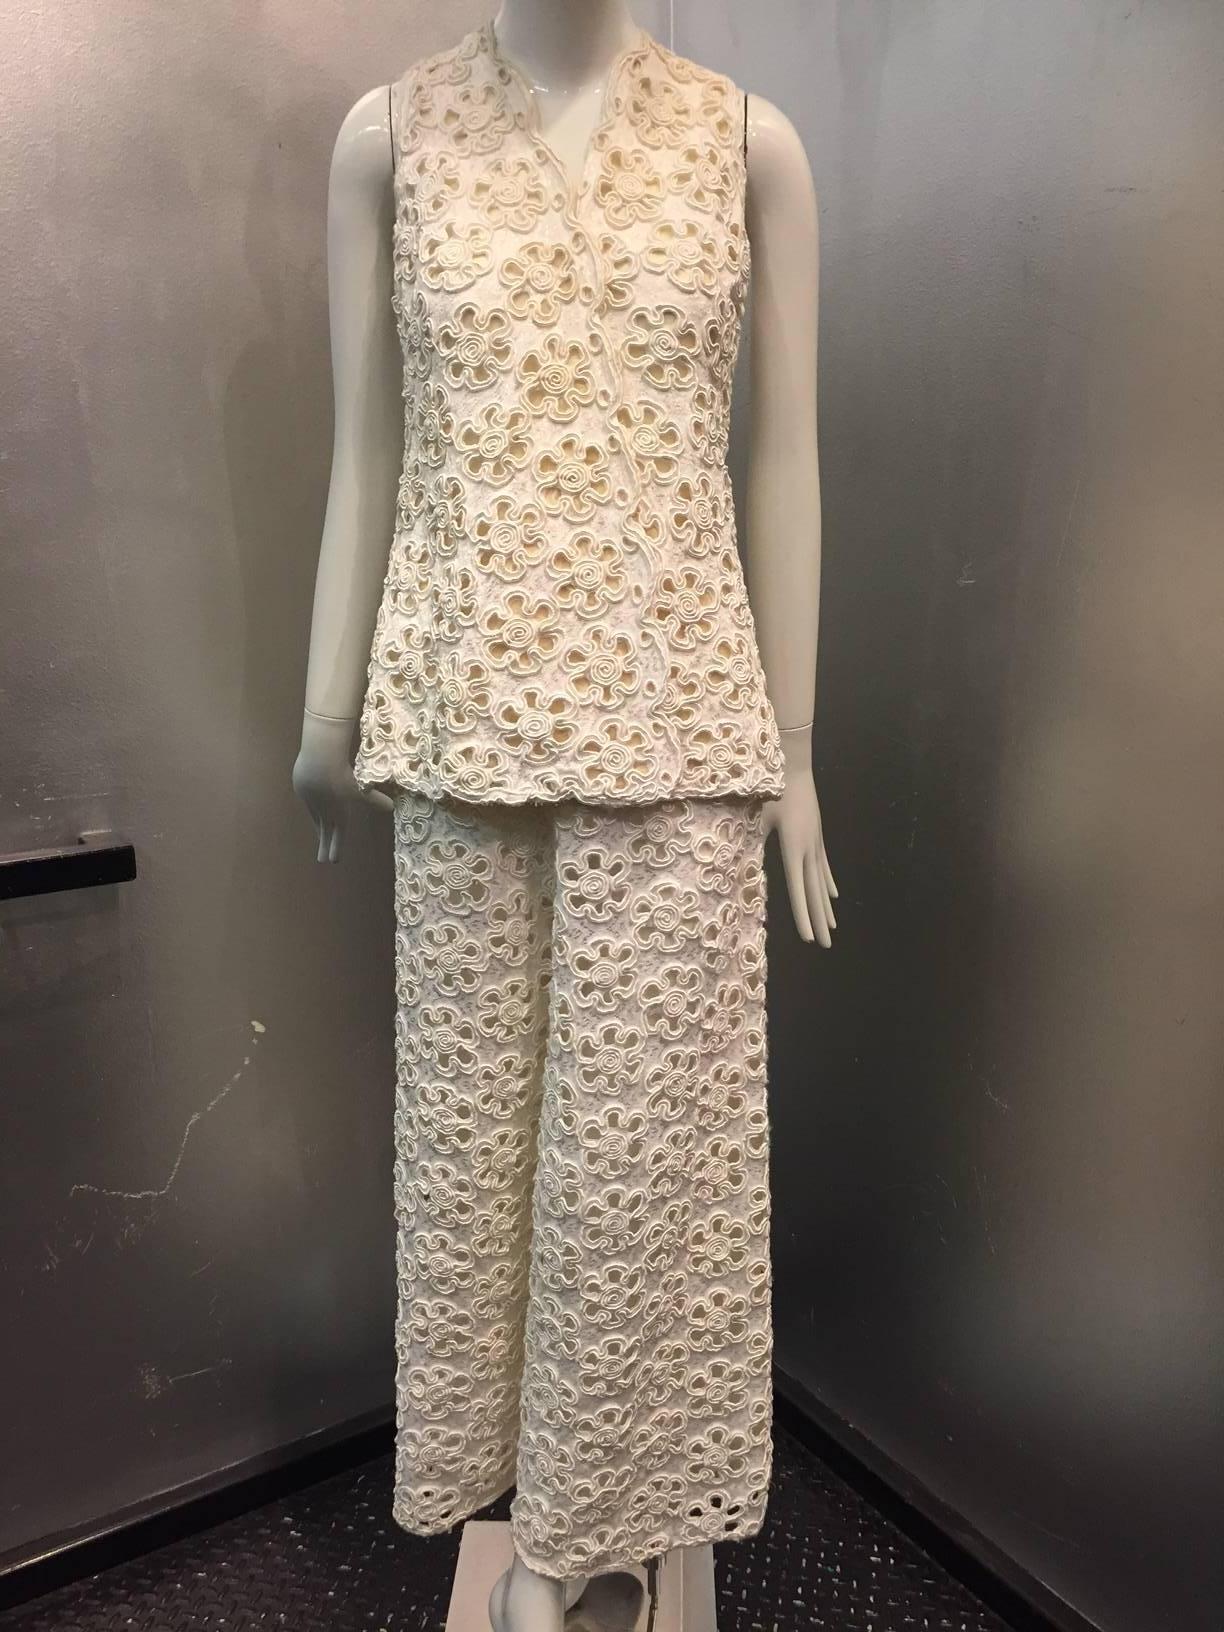 Women's 1960s James Galanos Mod Cream Embroidered Eyelet Lace 3-Piece Pant Suit For Sale